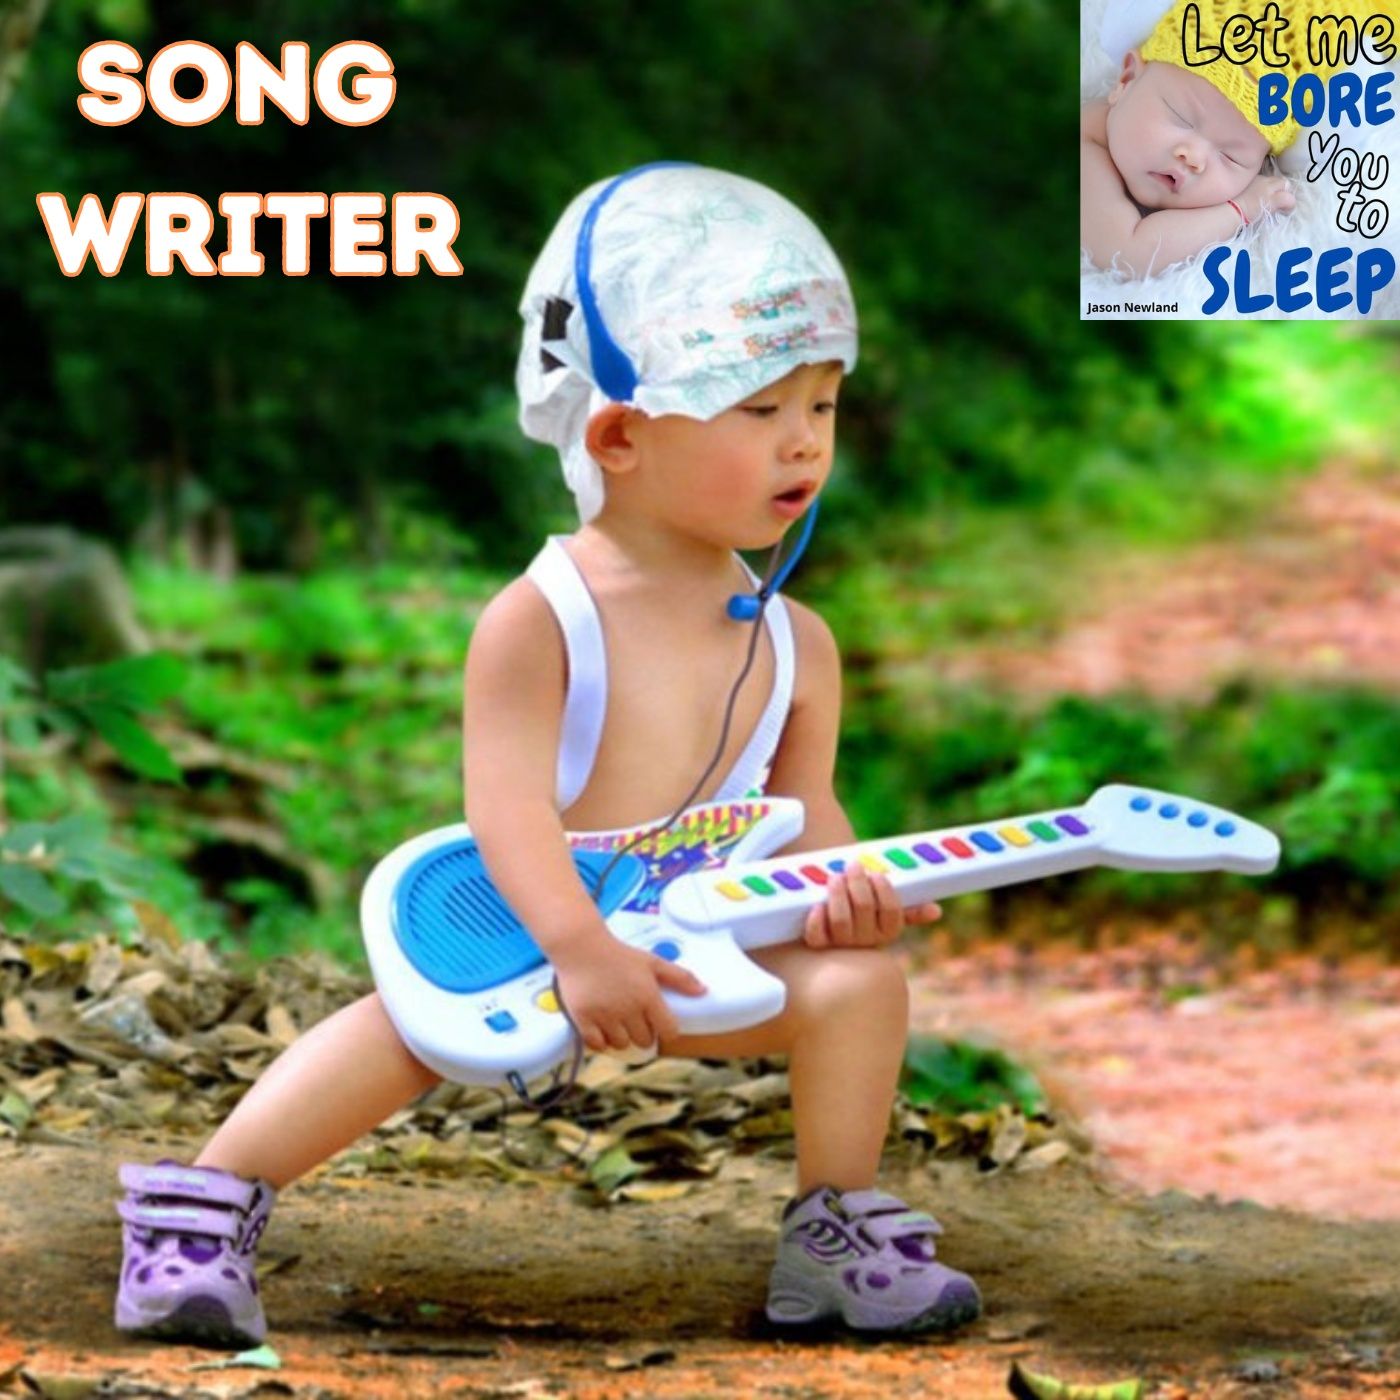 #1048 - Song writer - Let me bore you to sleep